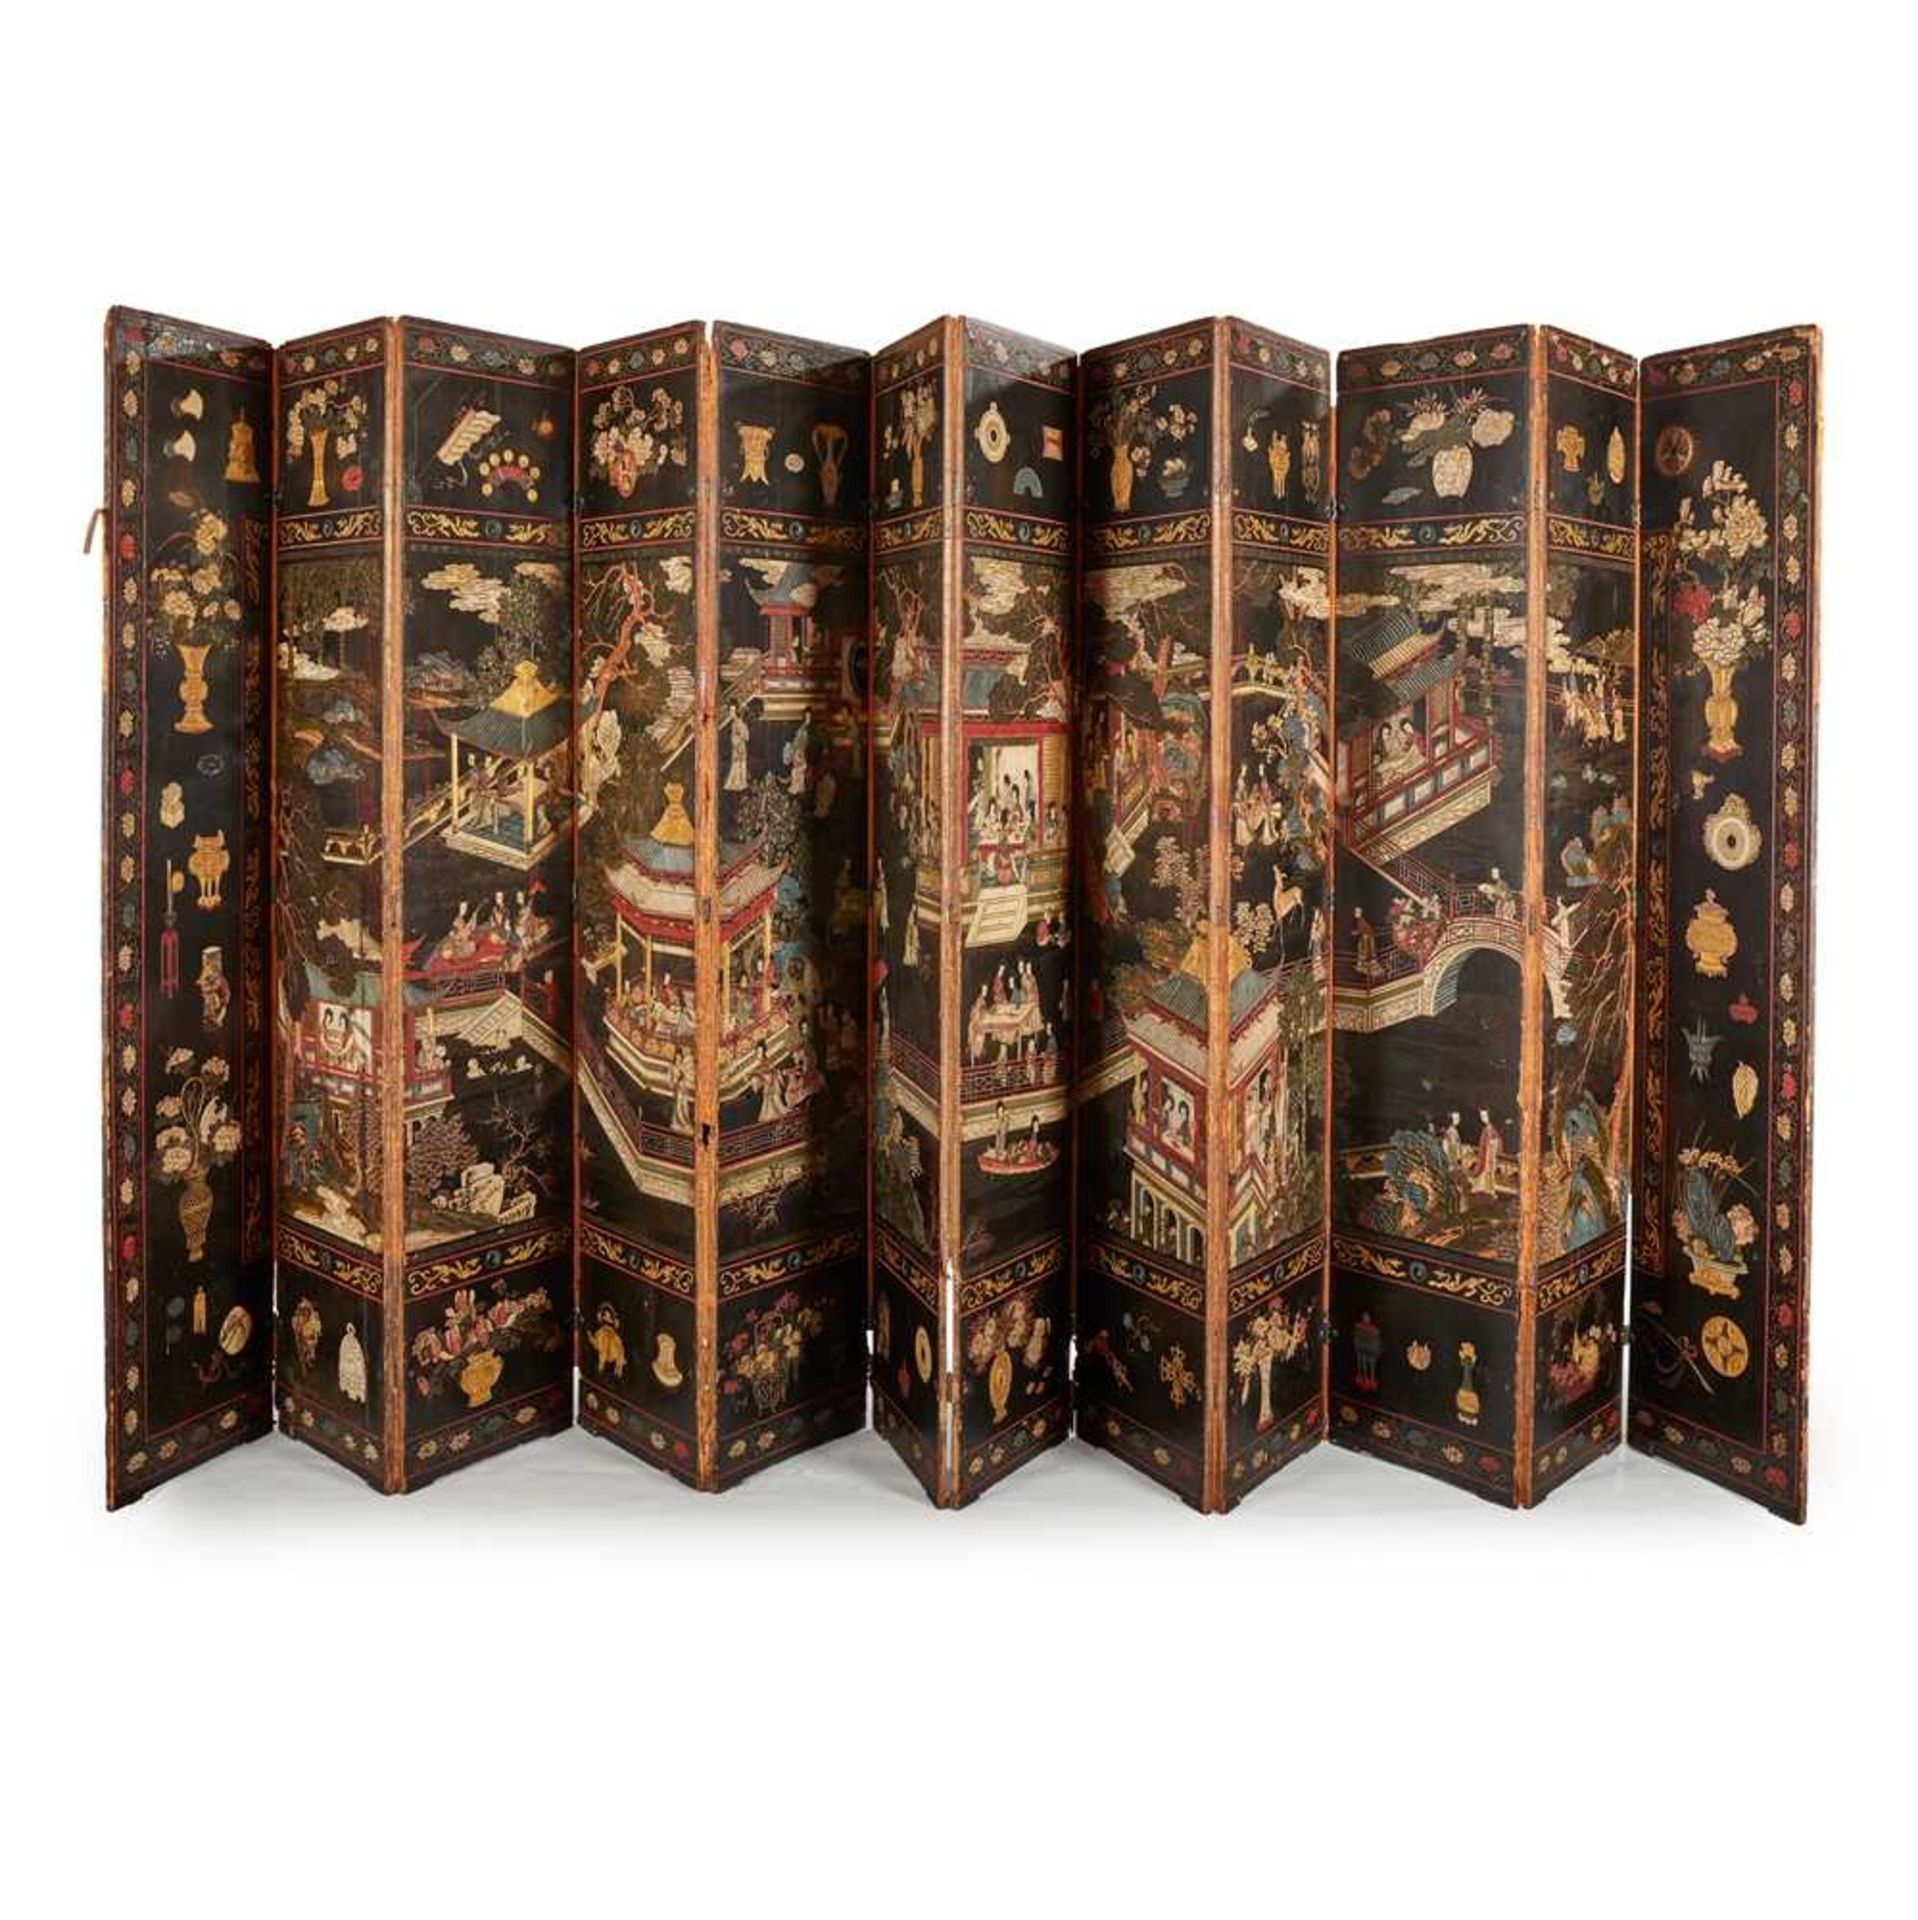 A CHINESE COROMANDEL BLACK LACQUER TWELVE-PANEL SCREEN QING DYNASTY, 18TH CENTURY - Image 2 of 72